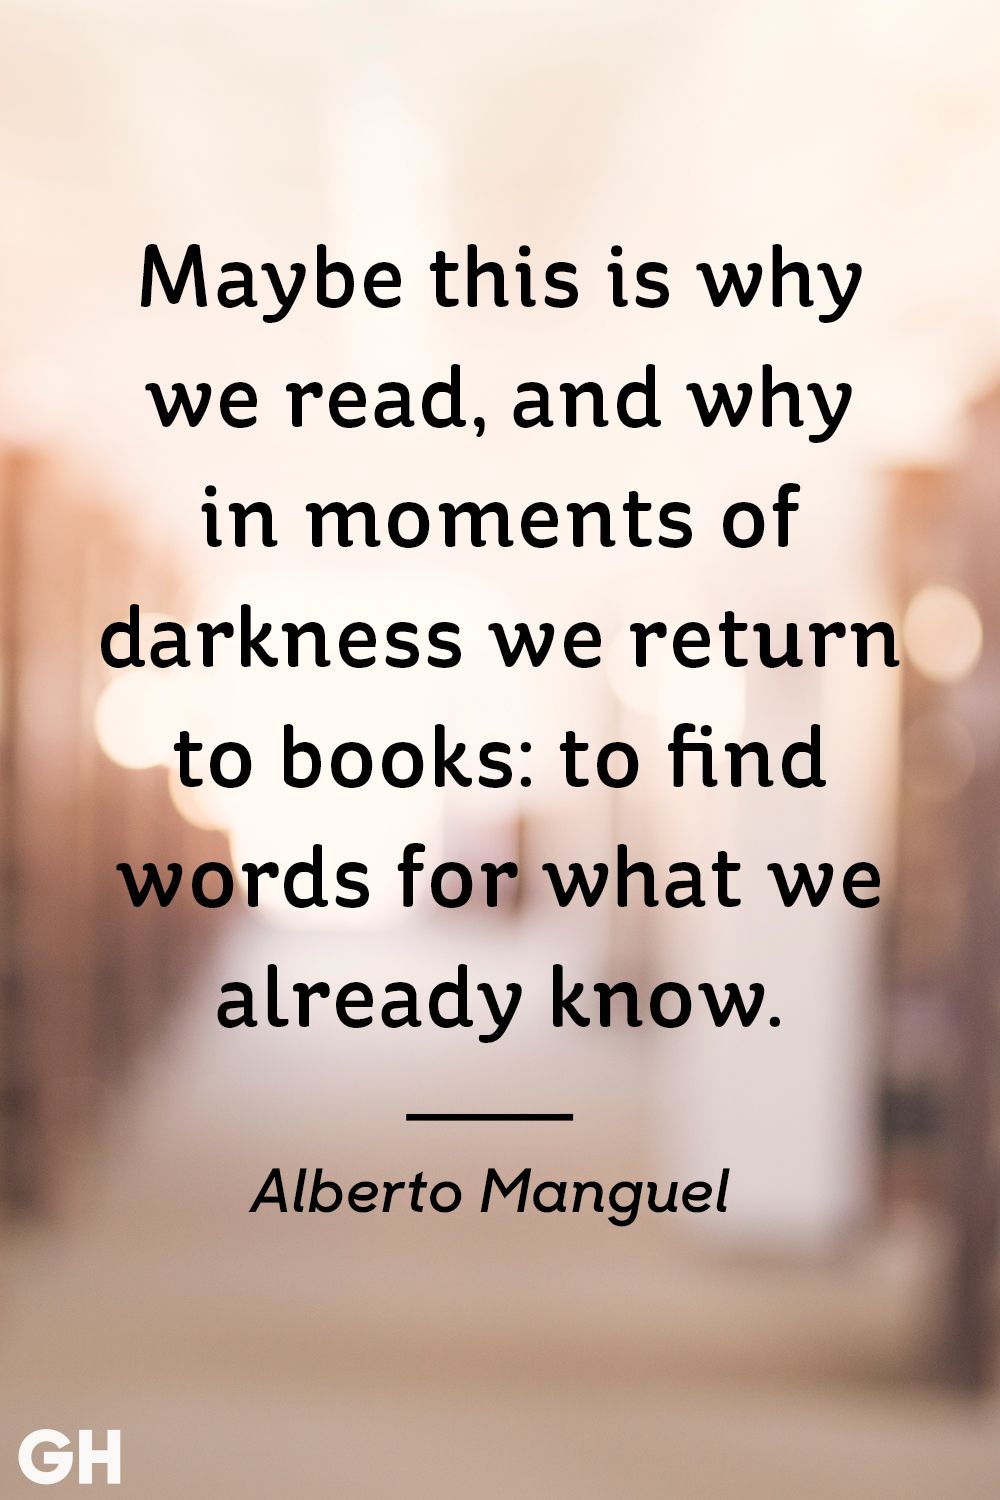 quotes about books and life